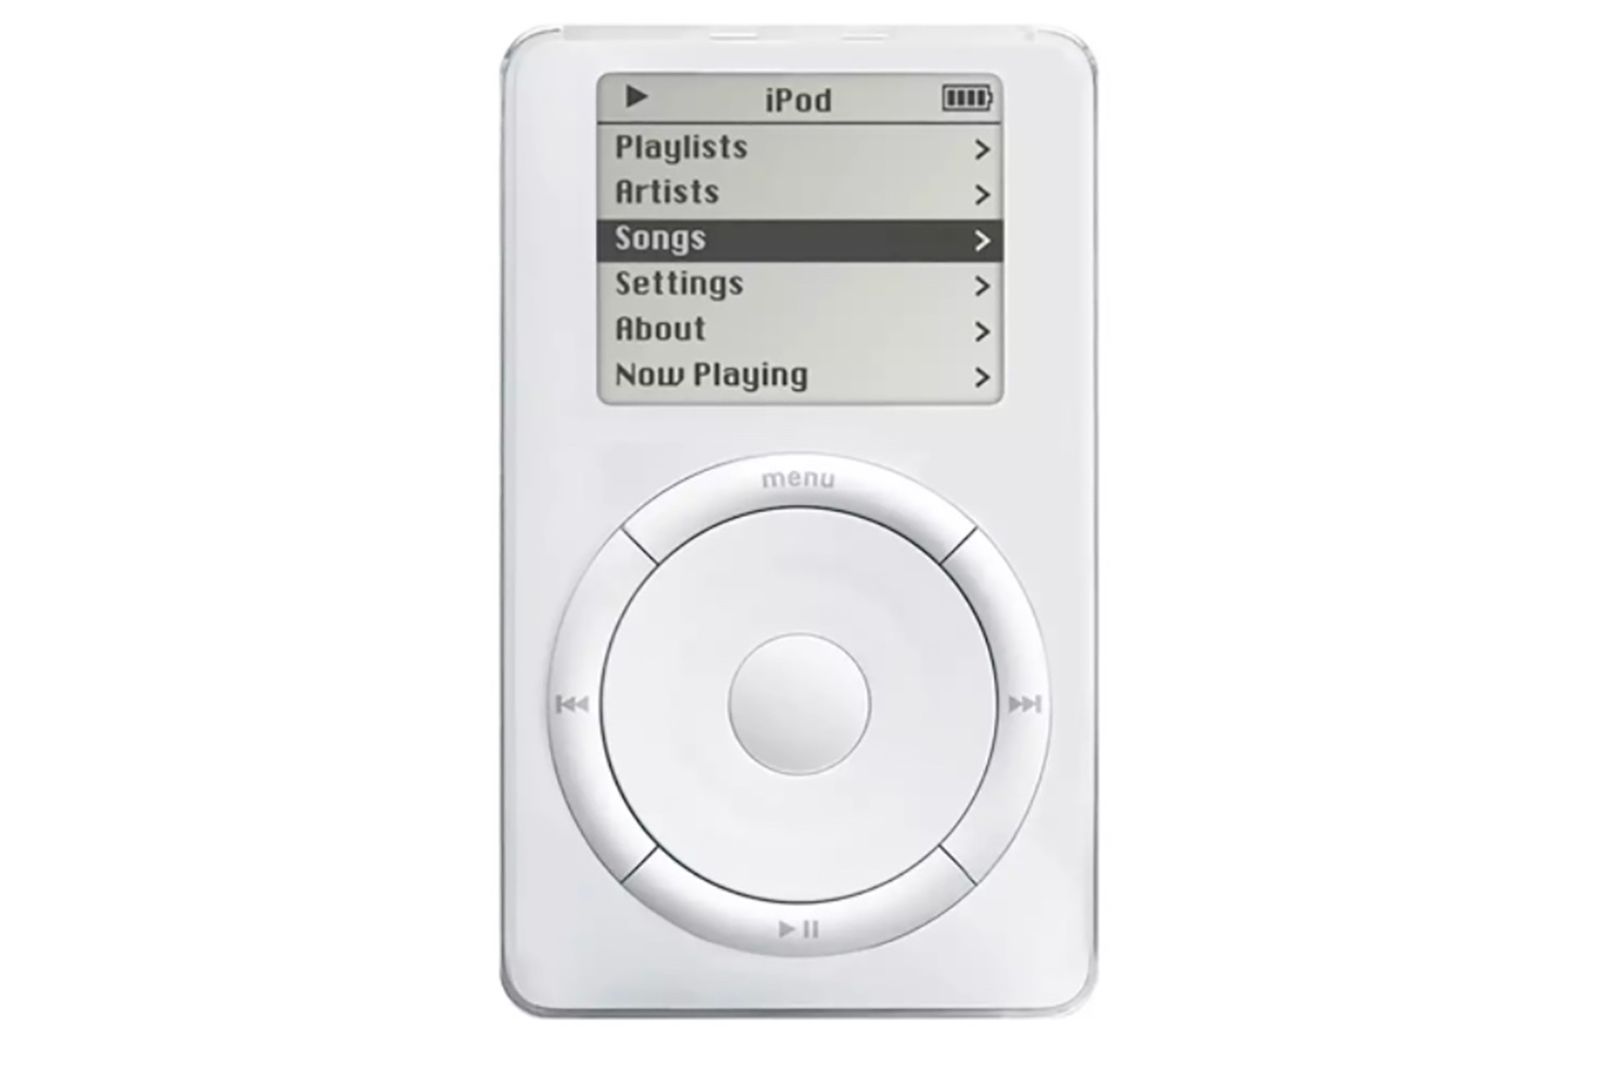 Every Apple iPod Model over the years (2001 to 2022) photo 1